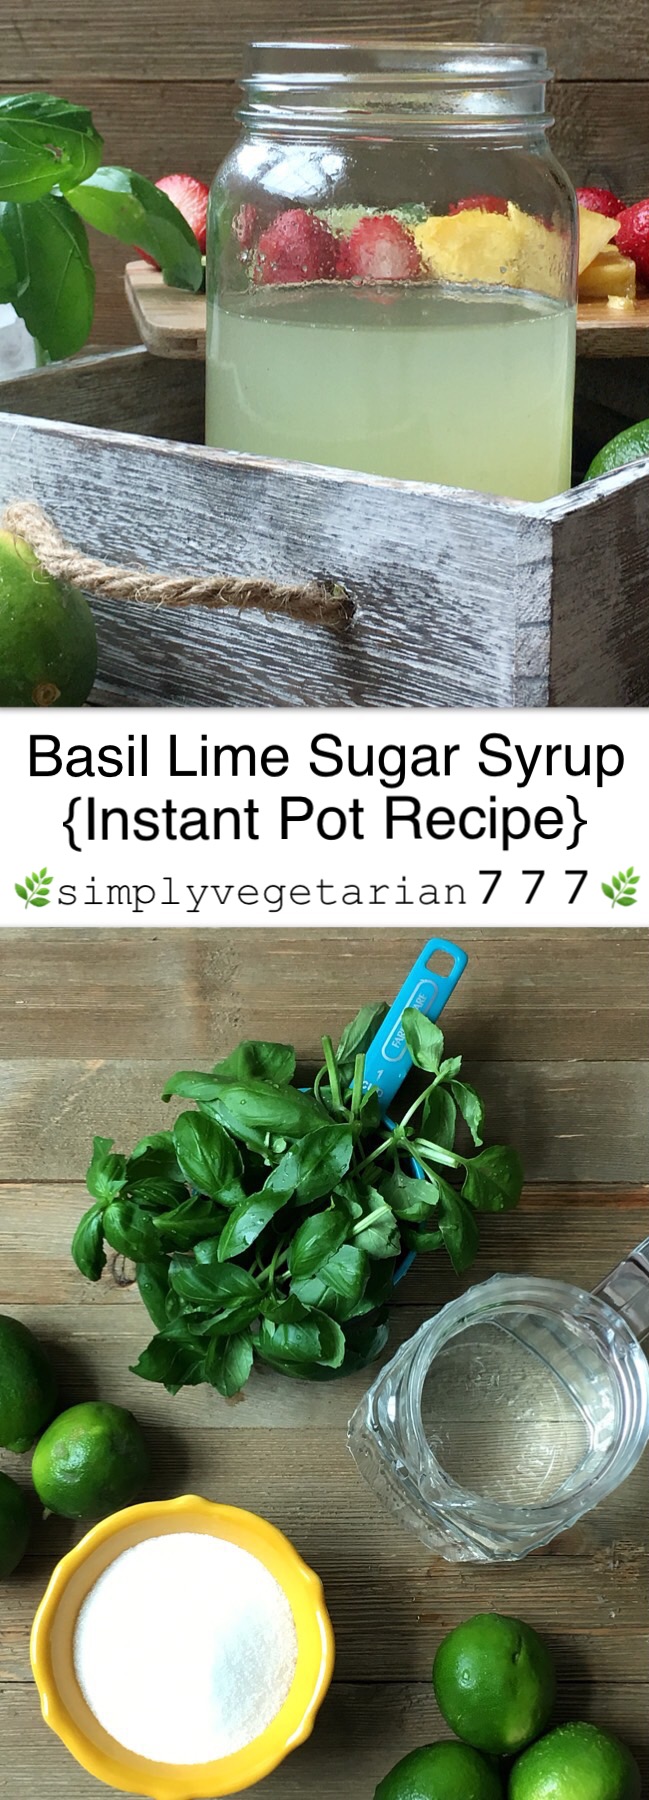 Instant Pot Basil Simple Syrup Recipe is a must try in summers. It is a flavorful simple sugar syrup enhanced with Basil and Lime. The syrup made in Instant Pot serves as a perfect base to make drinks of your choice. You can use the syrup in making mocktails, cocktails, spritzers, sodas, and much more. Read the post to discover the magic of this easy 4 INGREDIENTS RECIPE. #sugarsyrup #simplesyrup #basilsyrup #instantpotsyruprecipe #instantpotrecipe